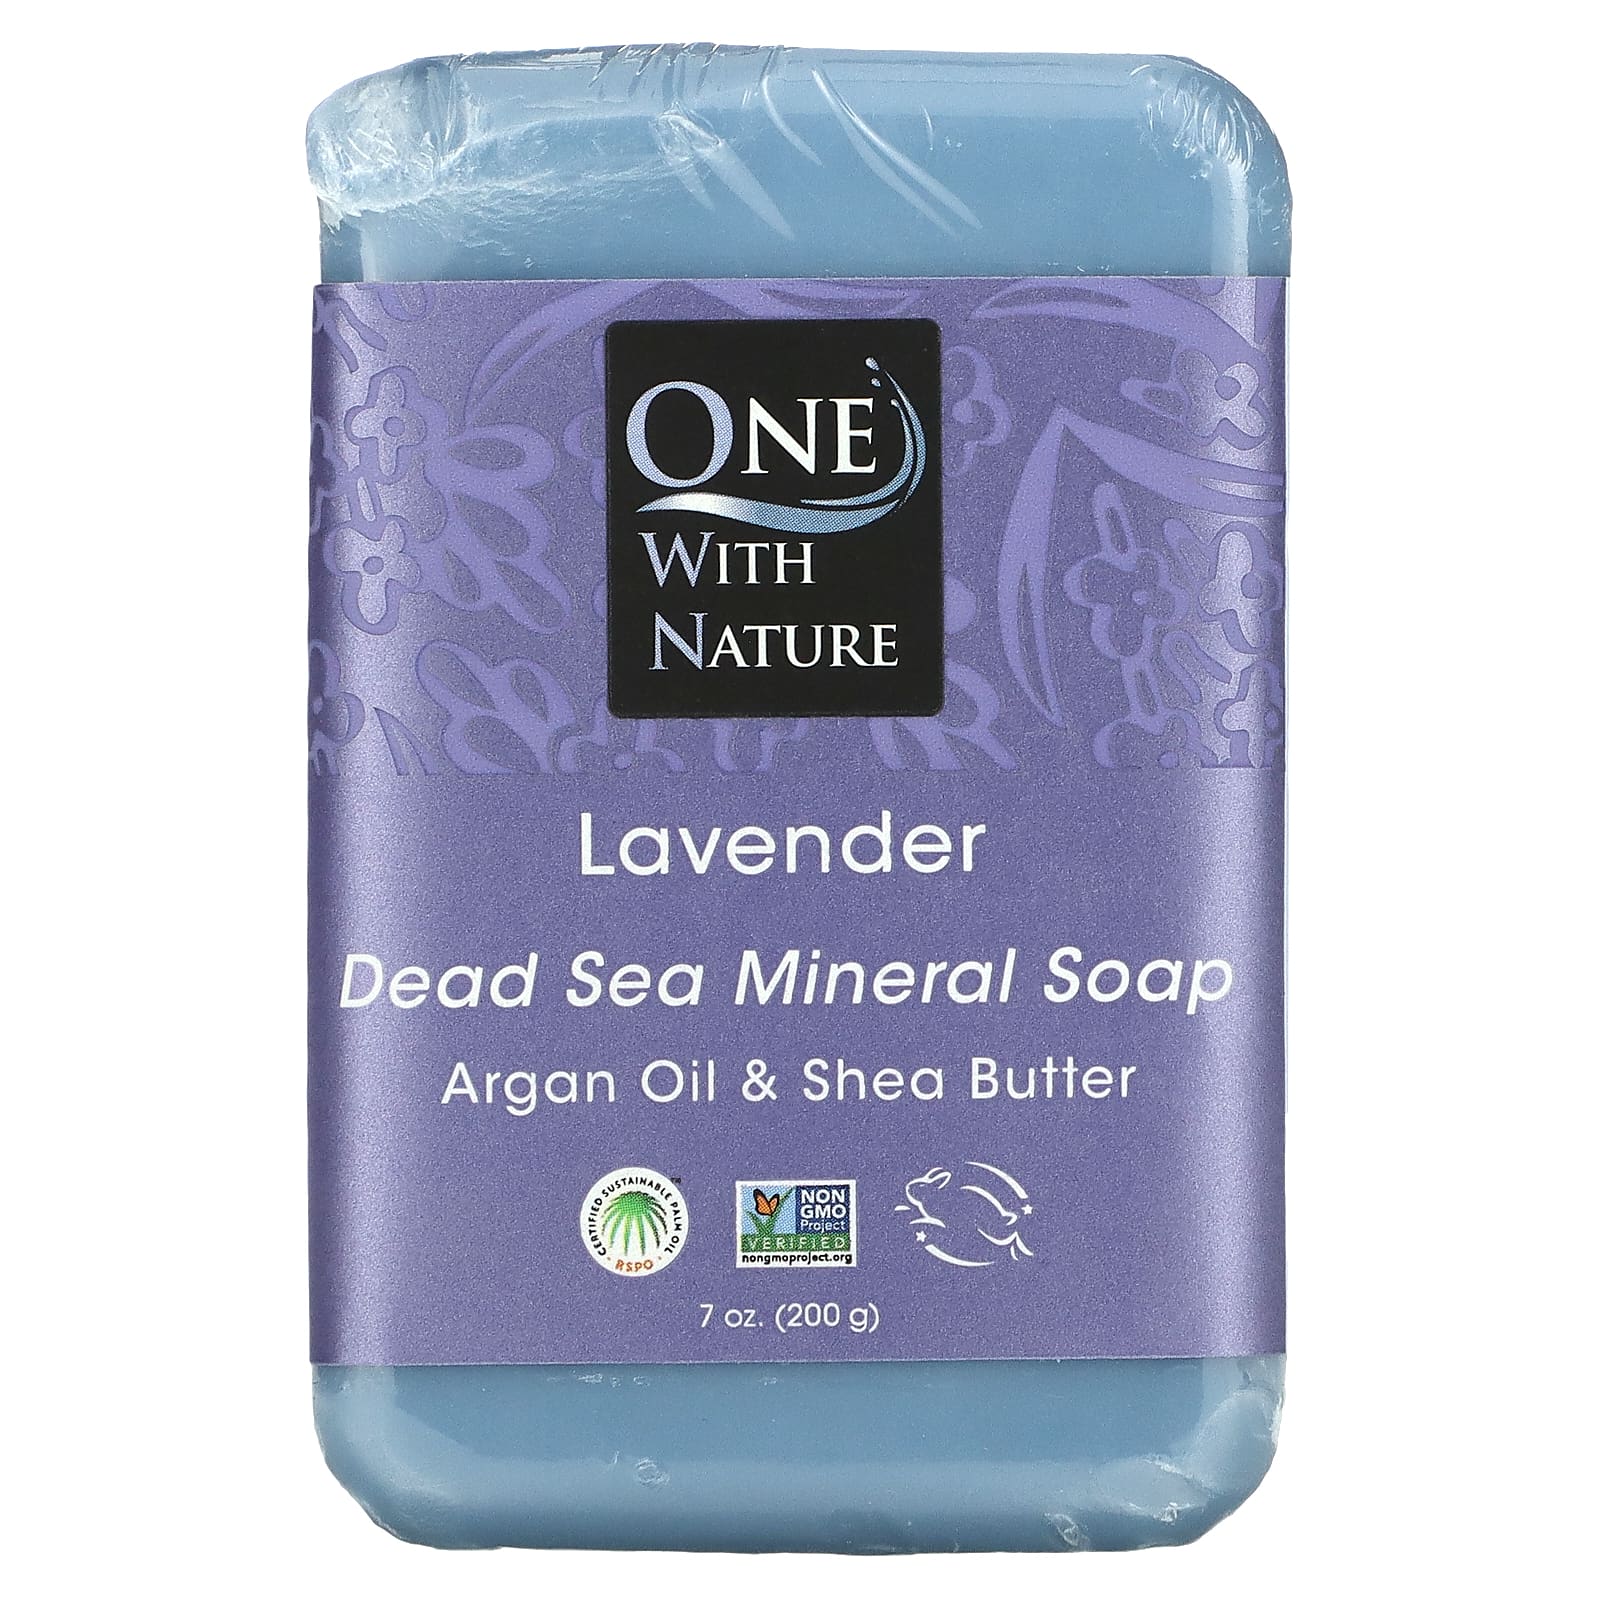 One with Nature Triple Milled Mineral Soap Bar Lavender 7 oz (200 g)